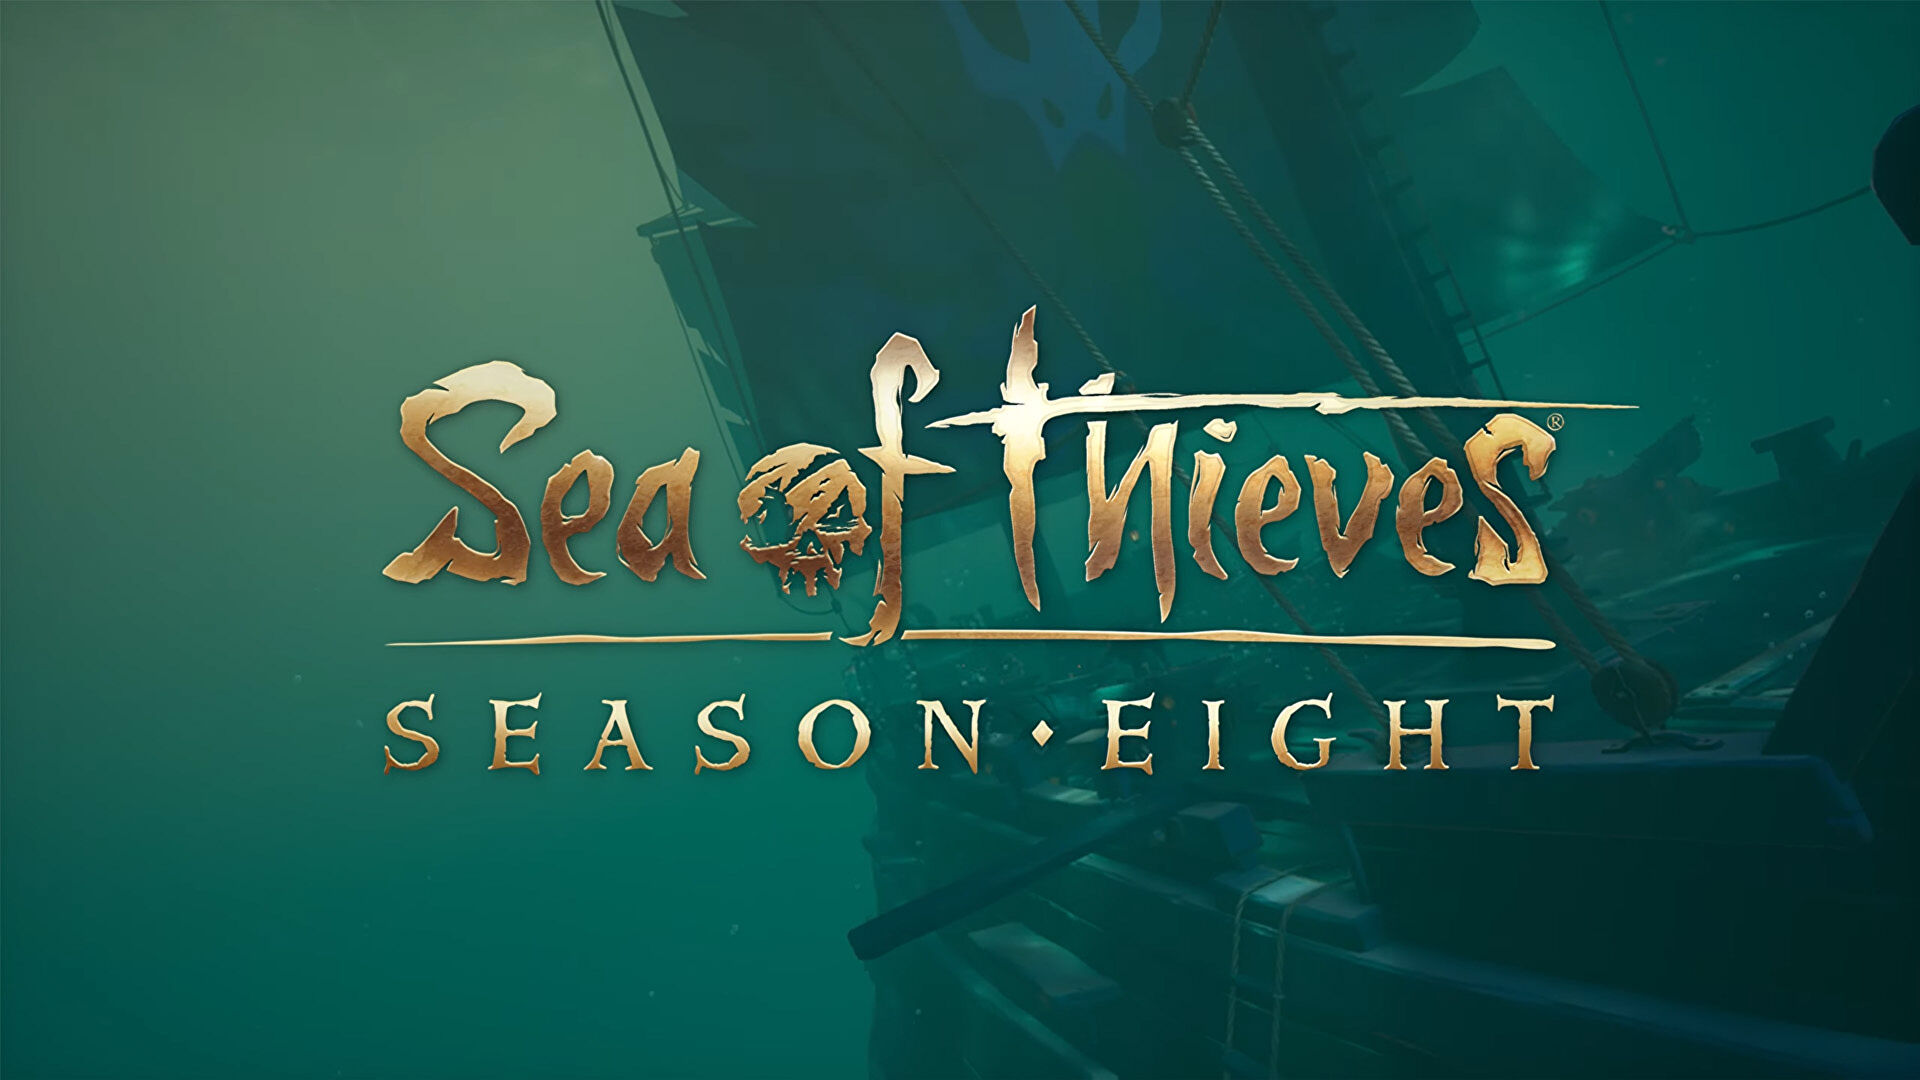 Sea of Thieves’ Season 8 brings new life to PvP with on-demand, faction action